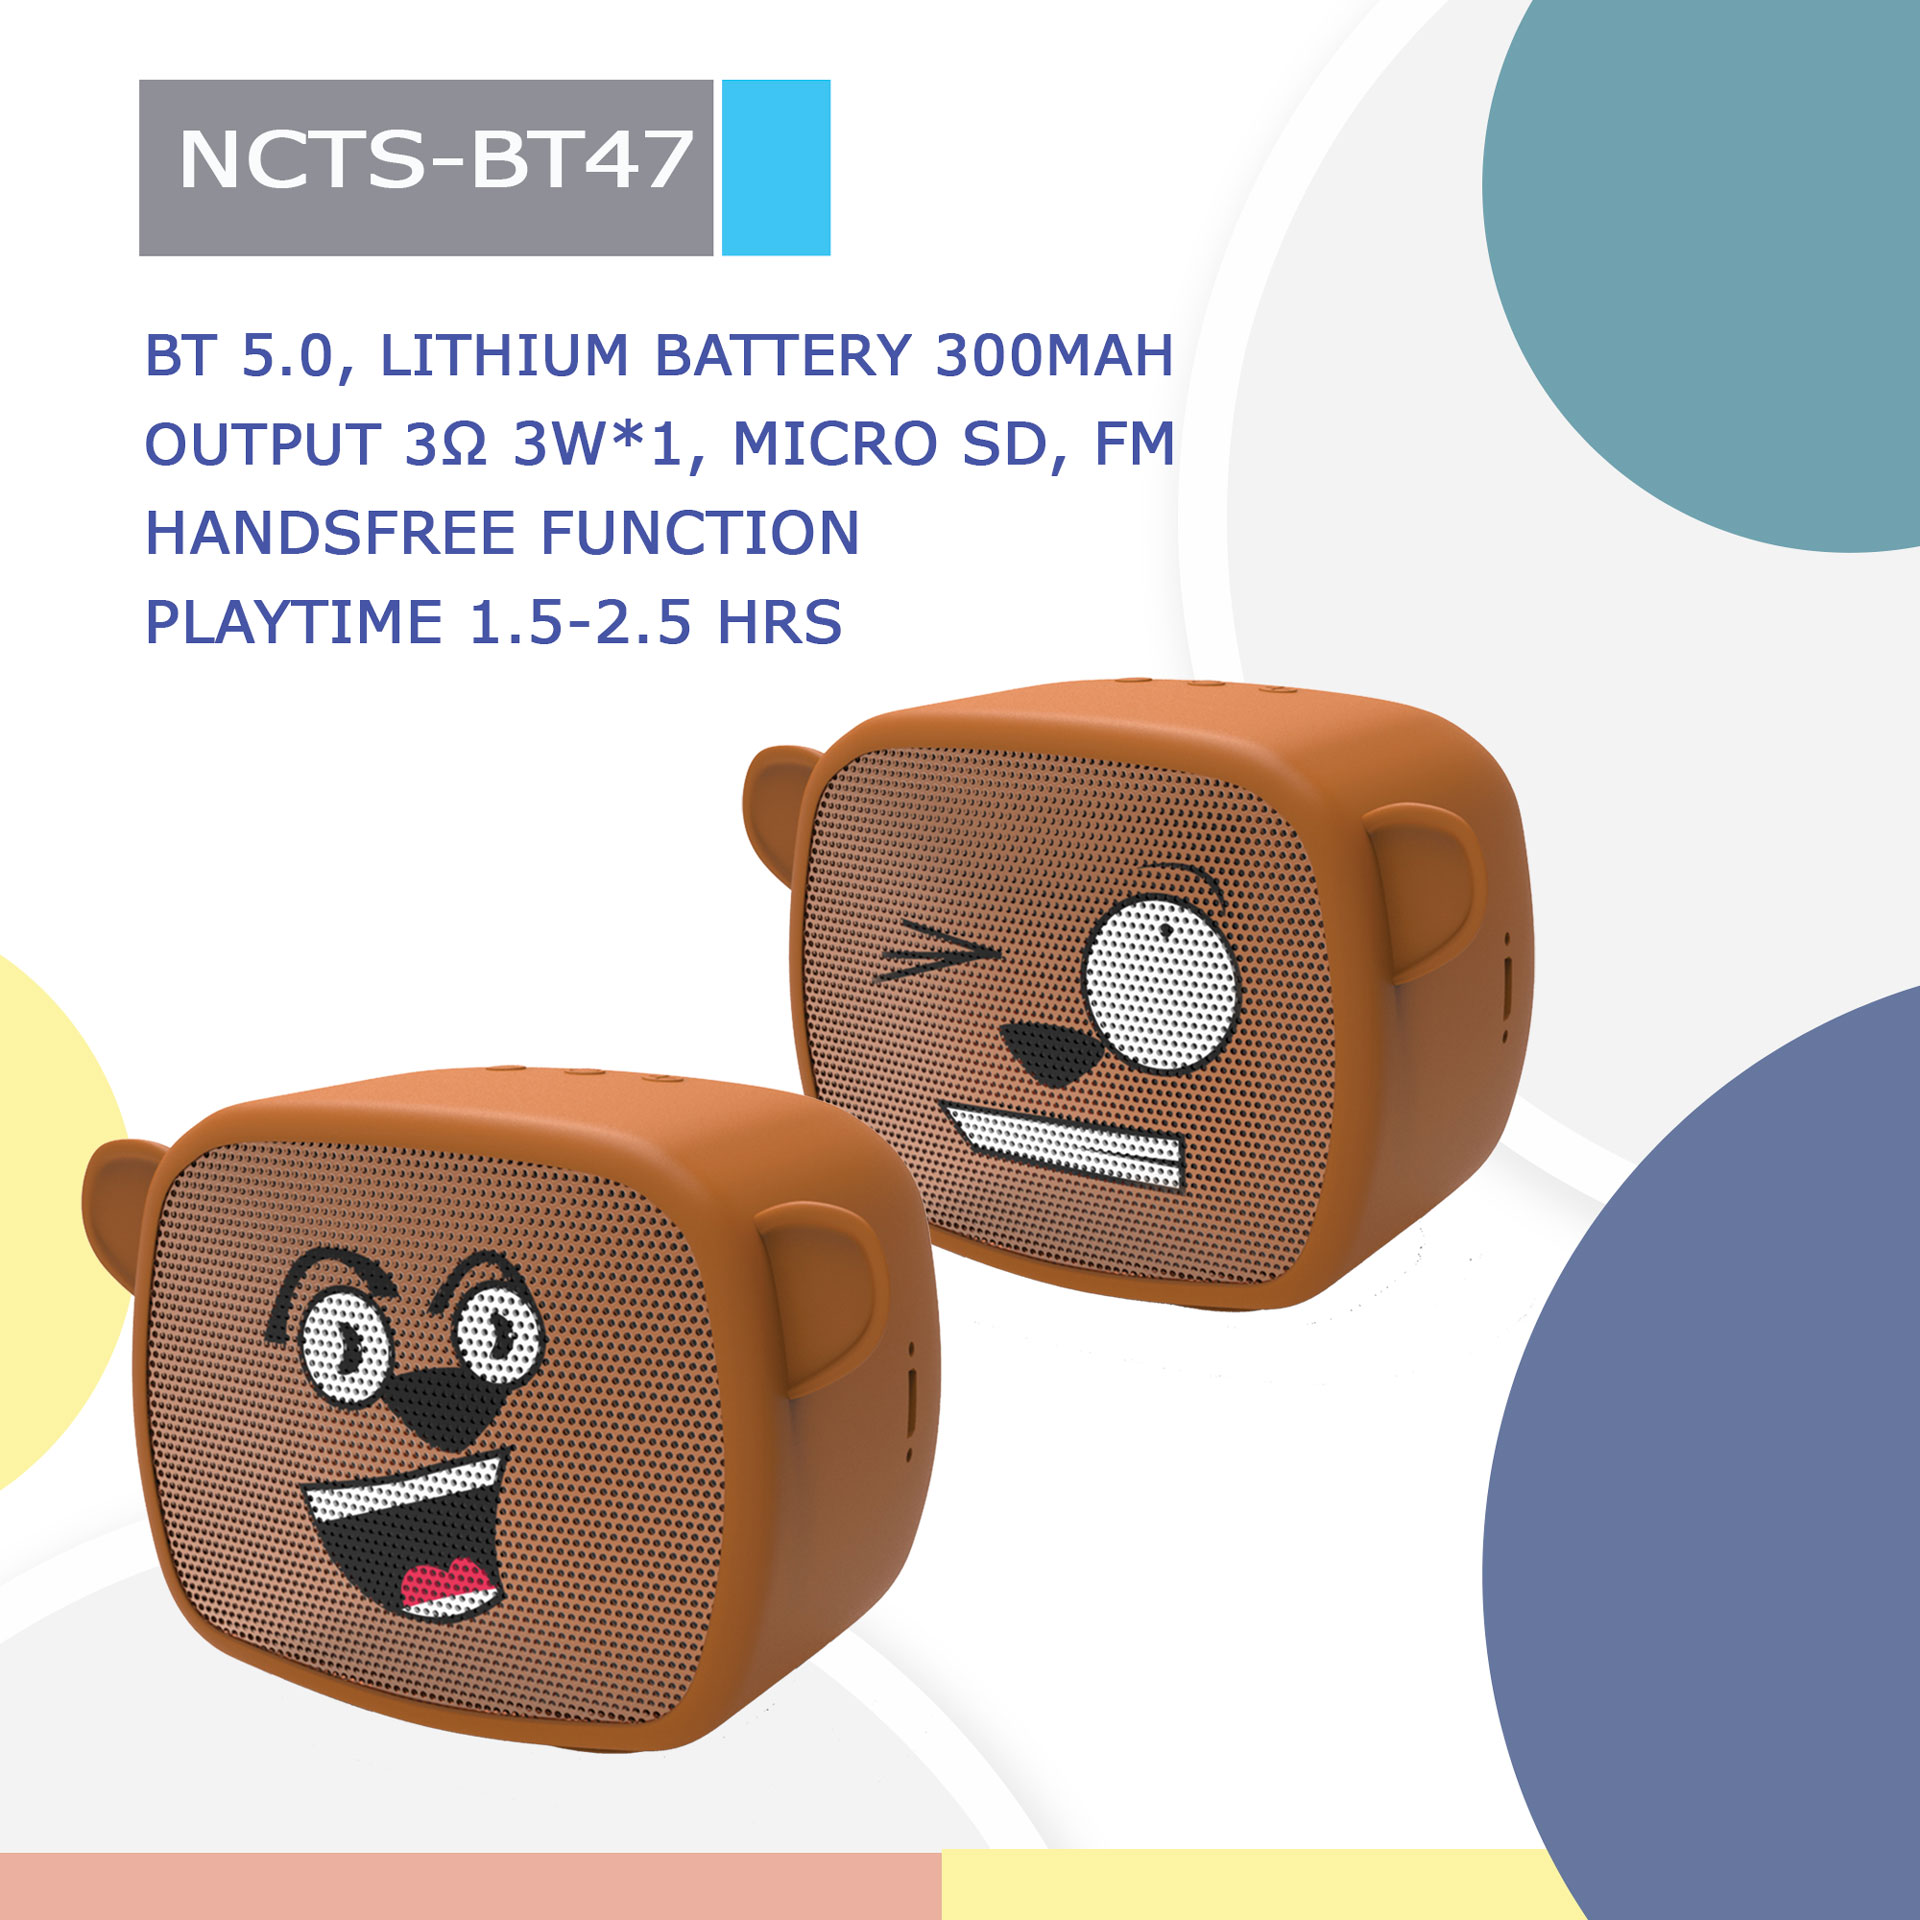 NCTS-BT47